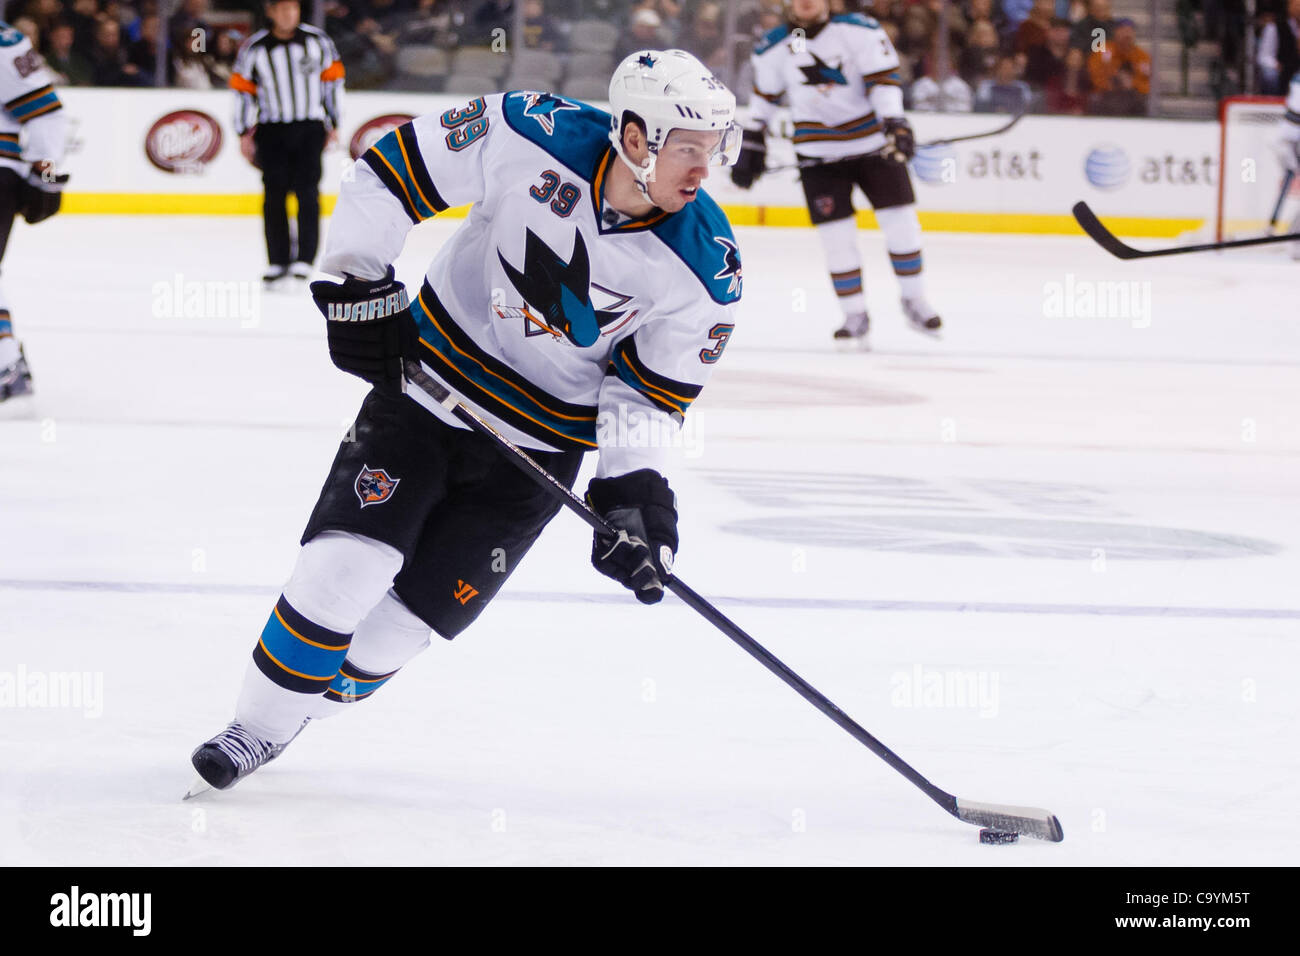 San Jose Sharks GM addresses Logan Couture trade rumors, early suitor  identified